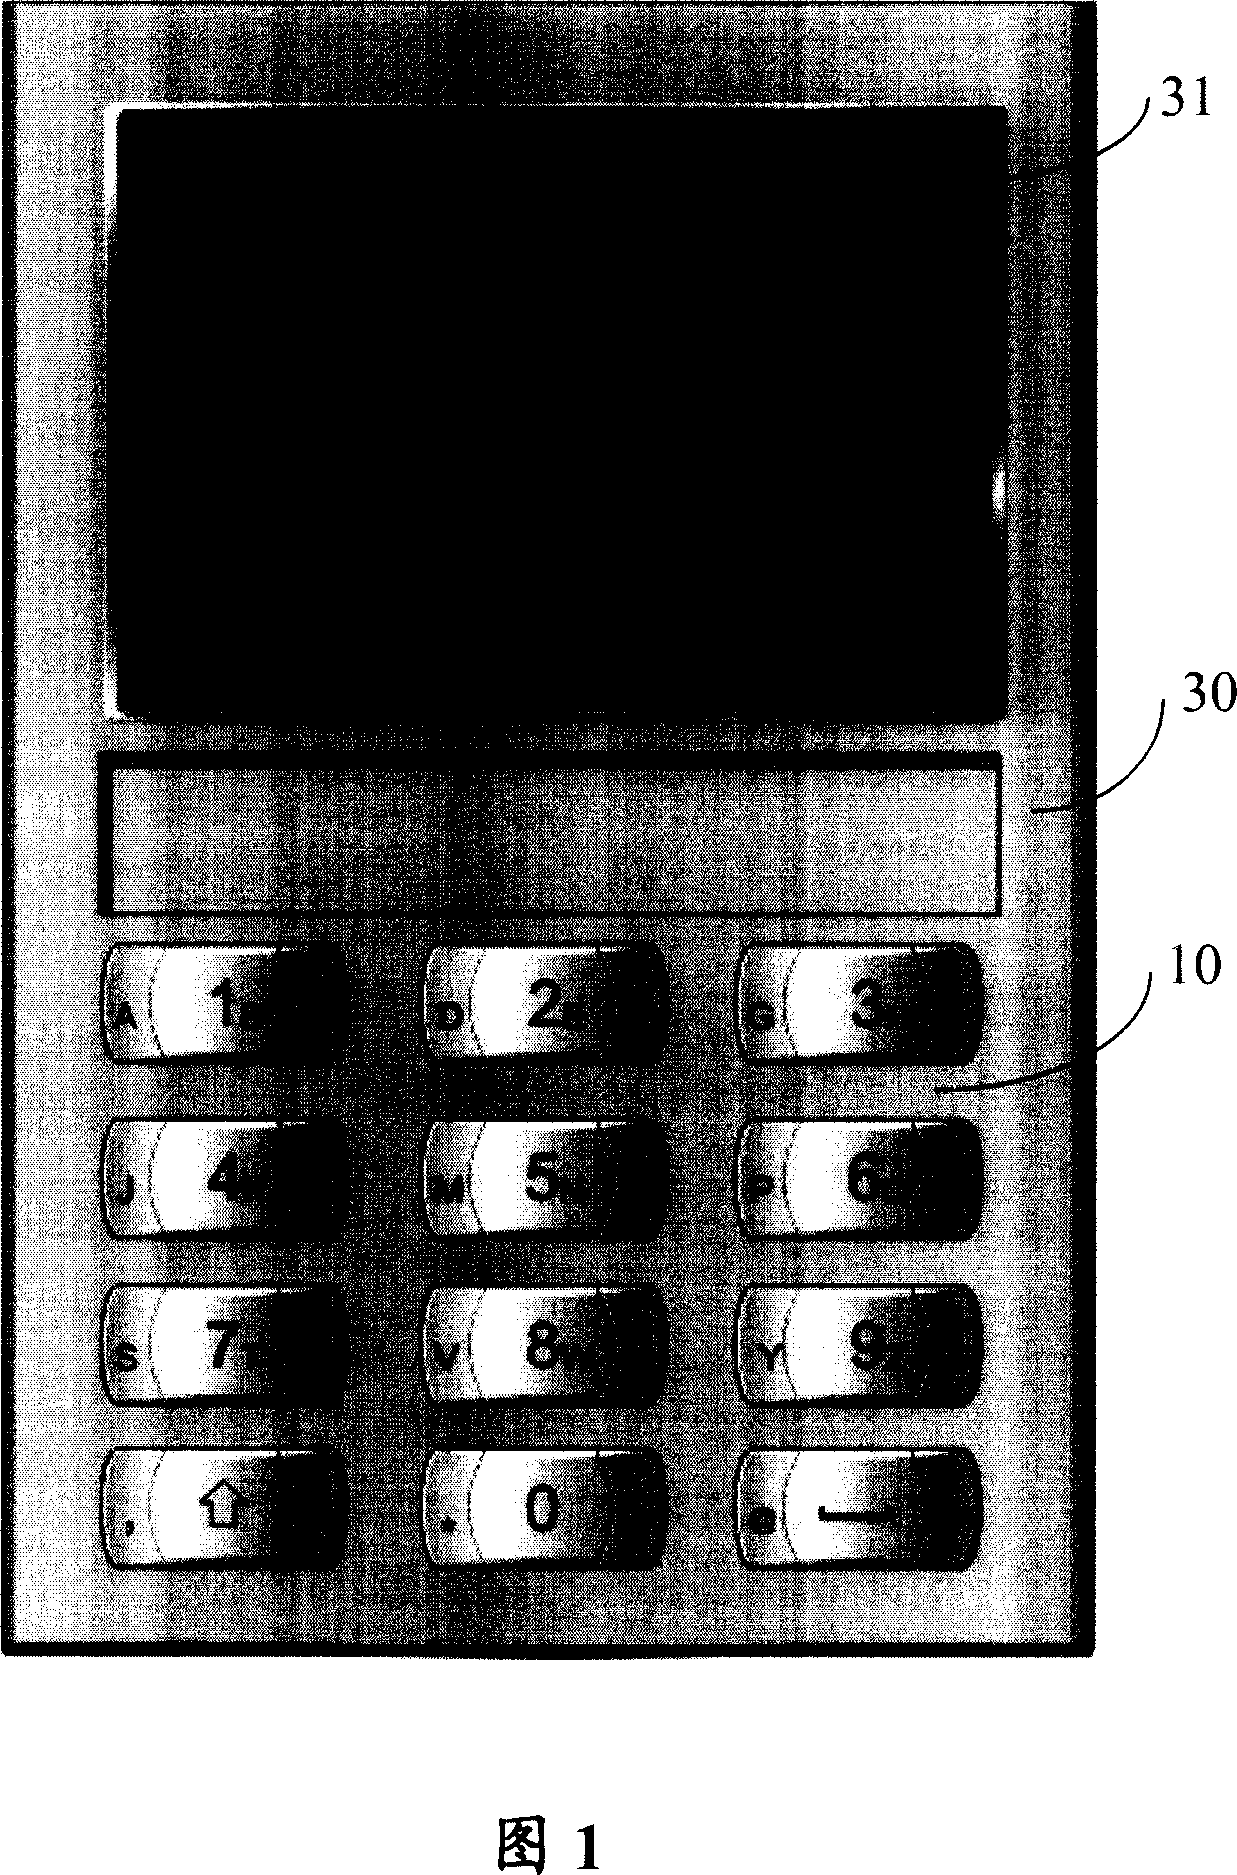 Composite keyboard, electronic device and character input method